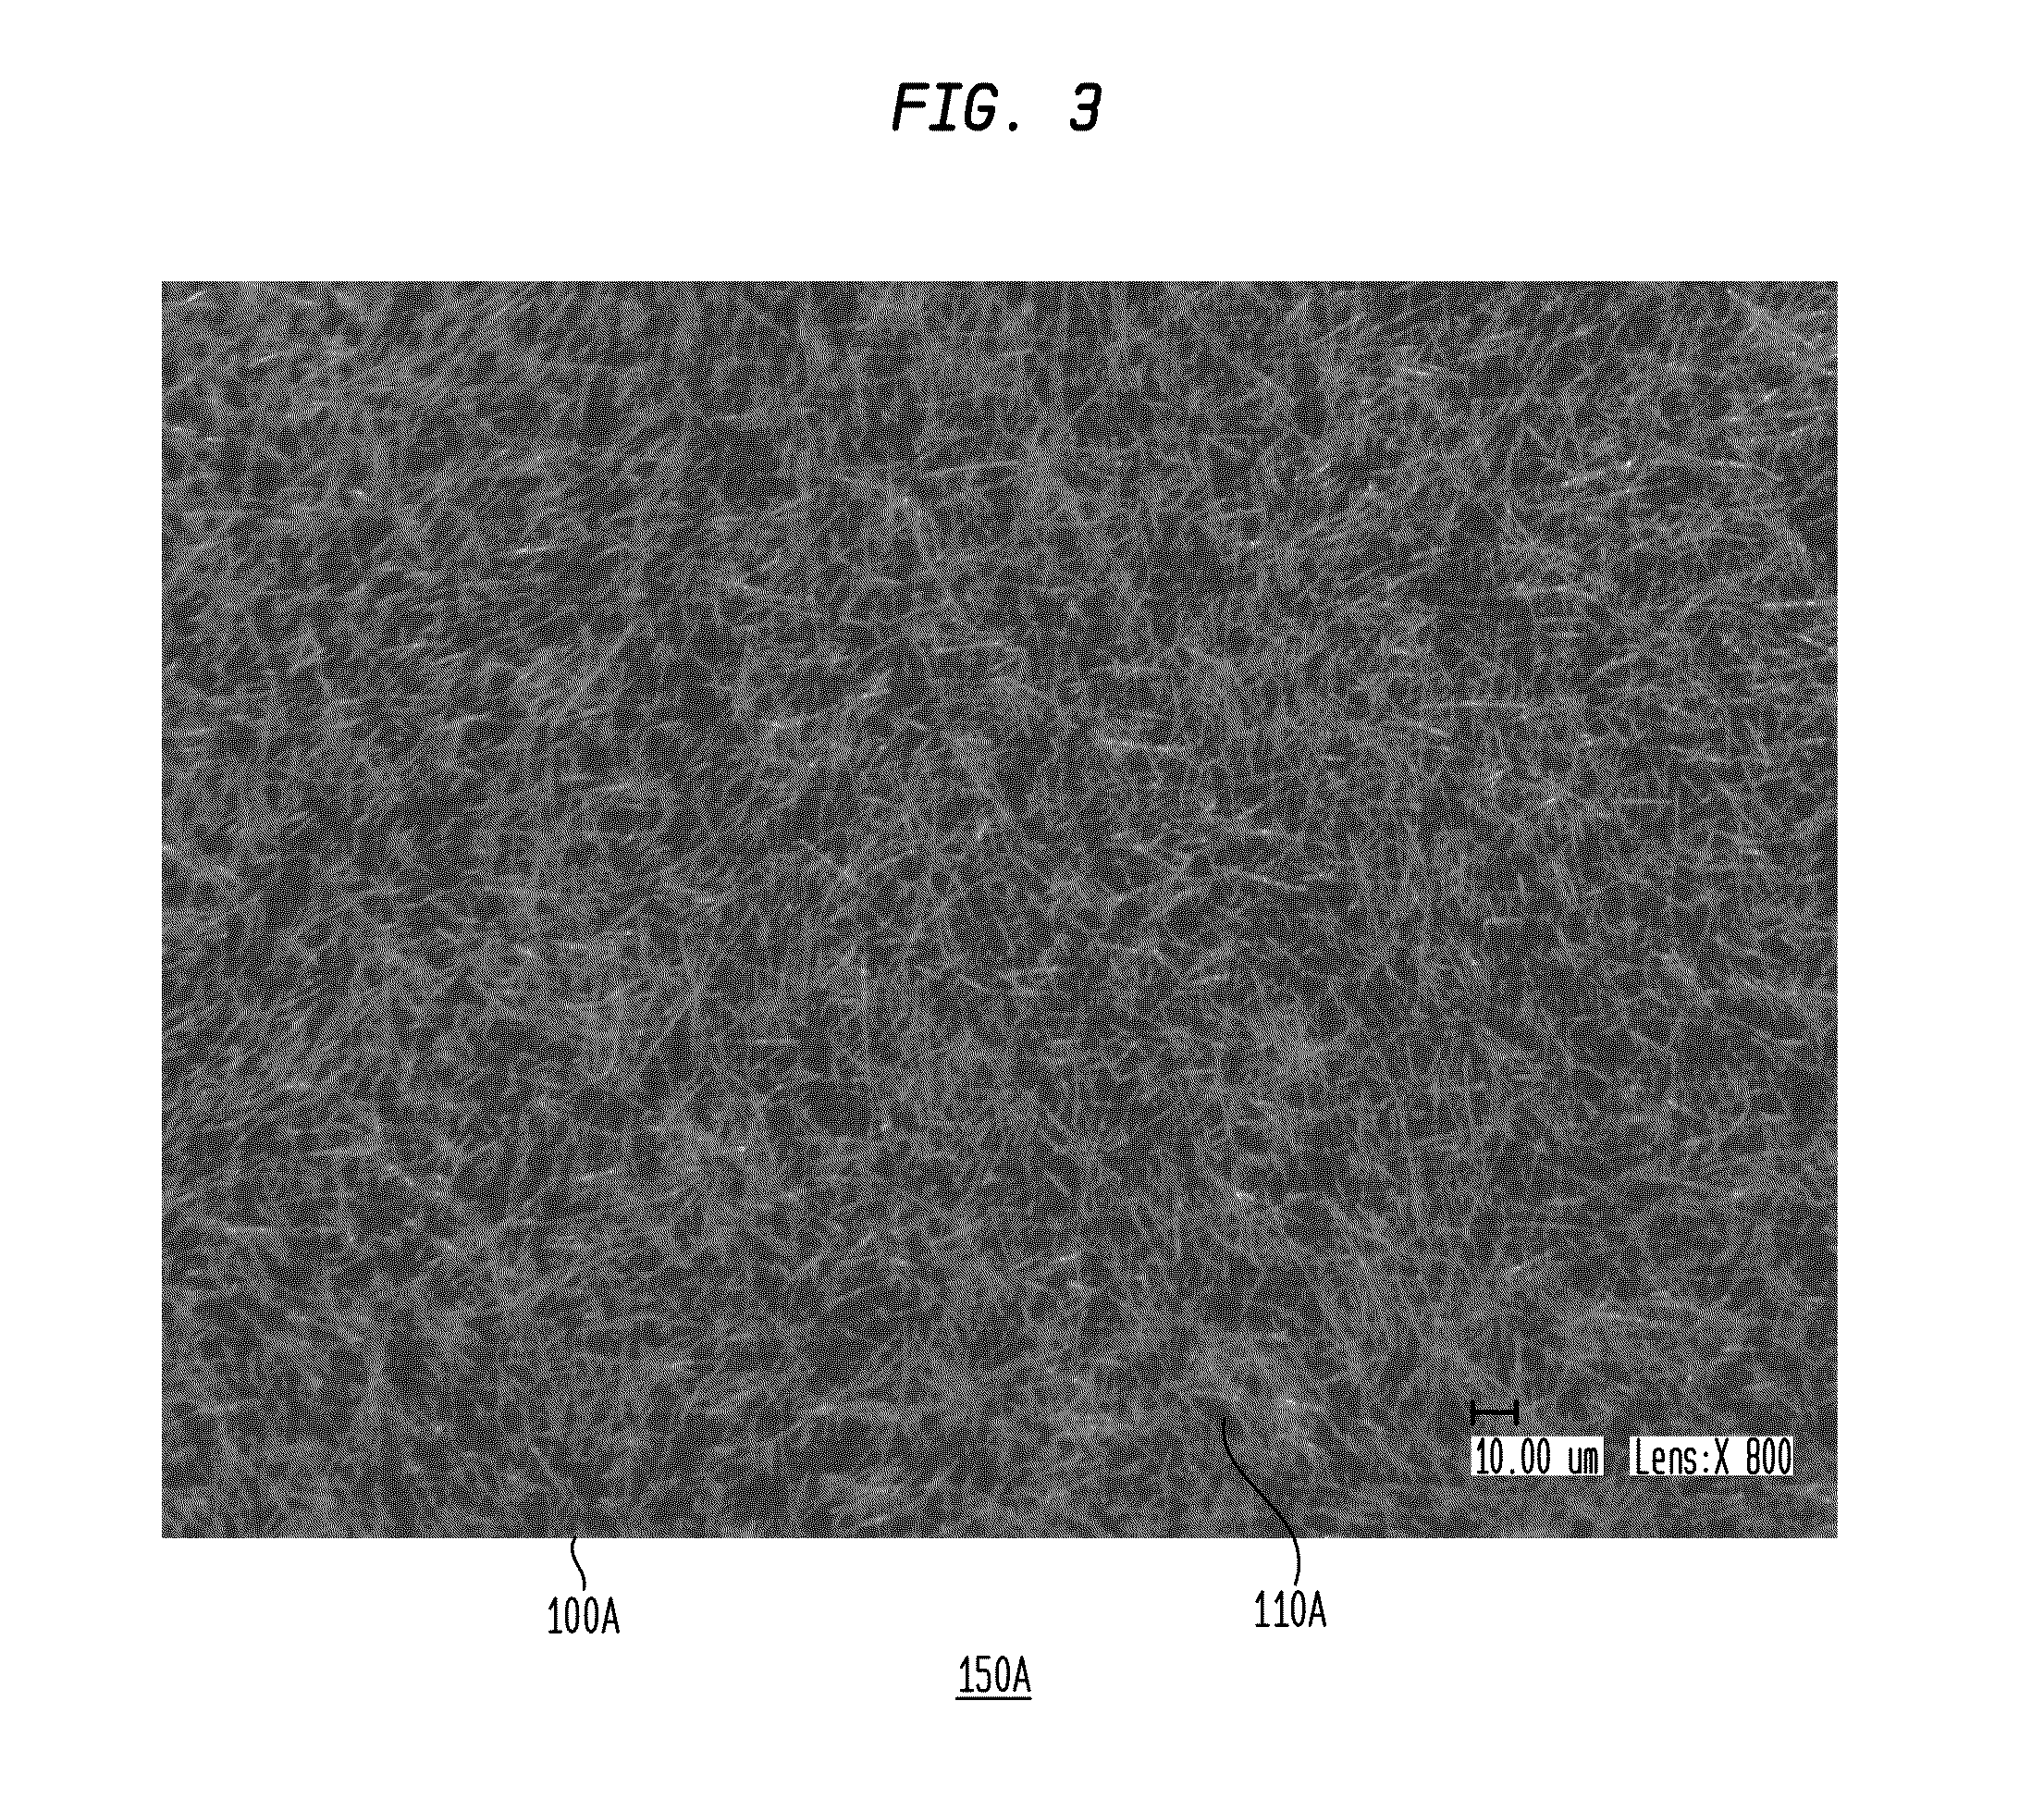 Metallic Nanofiber Ink, Substantially Transparent Conductor, and Fabrication Method